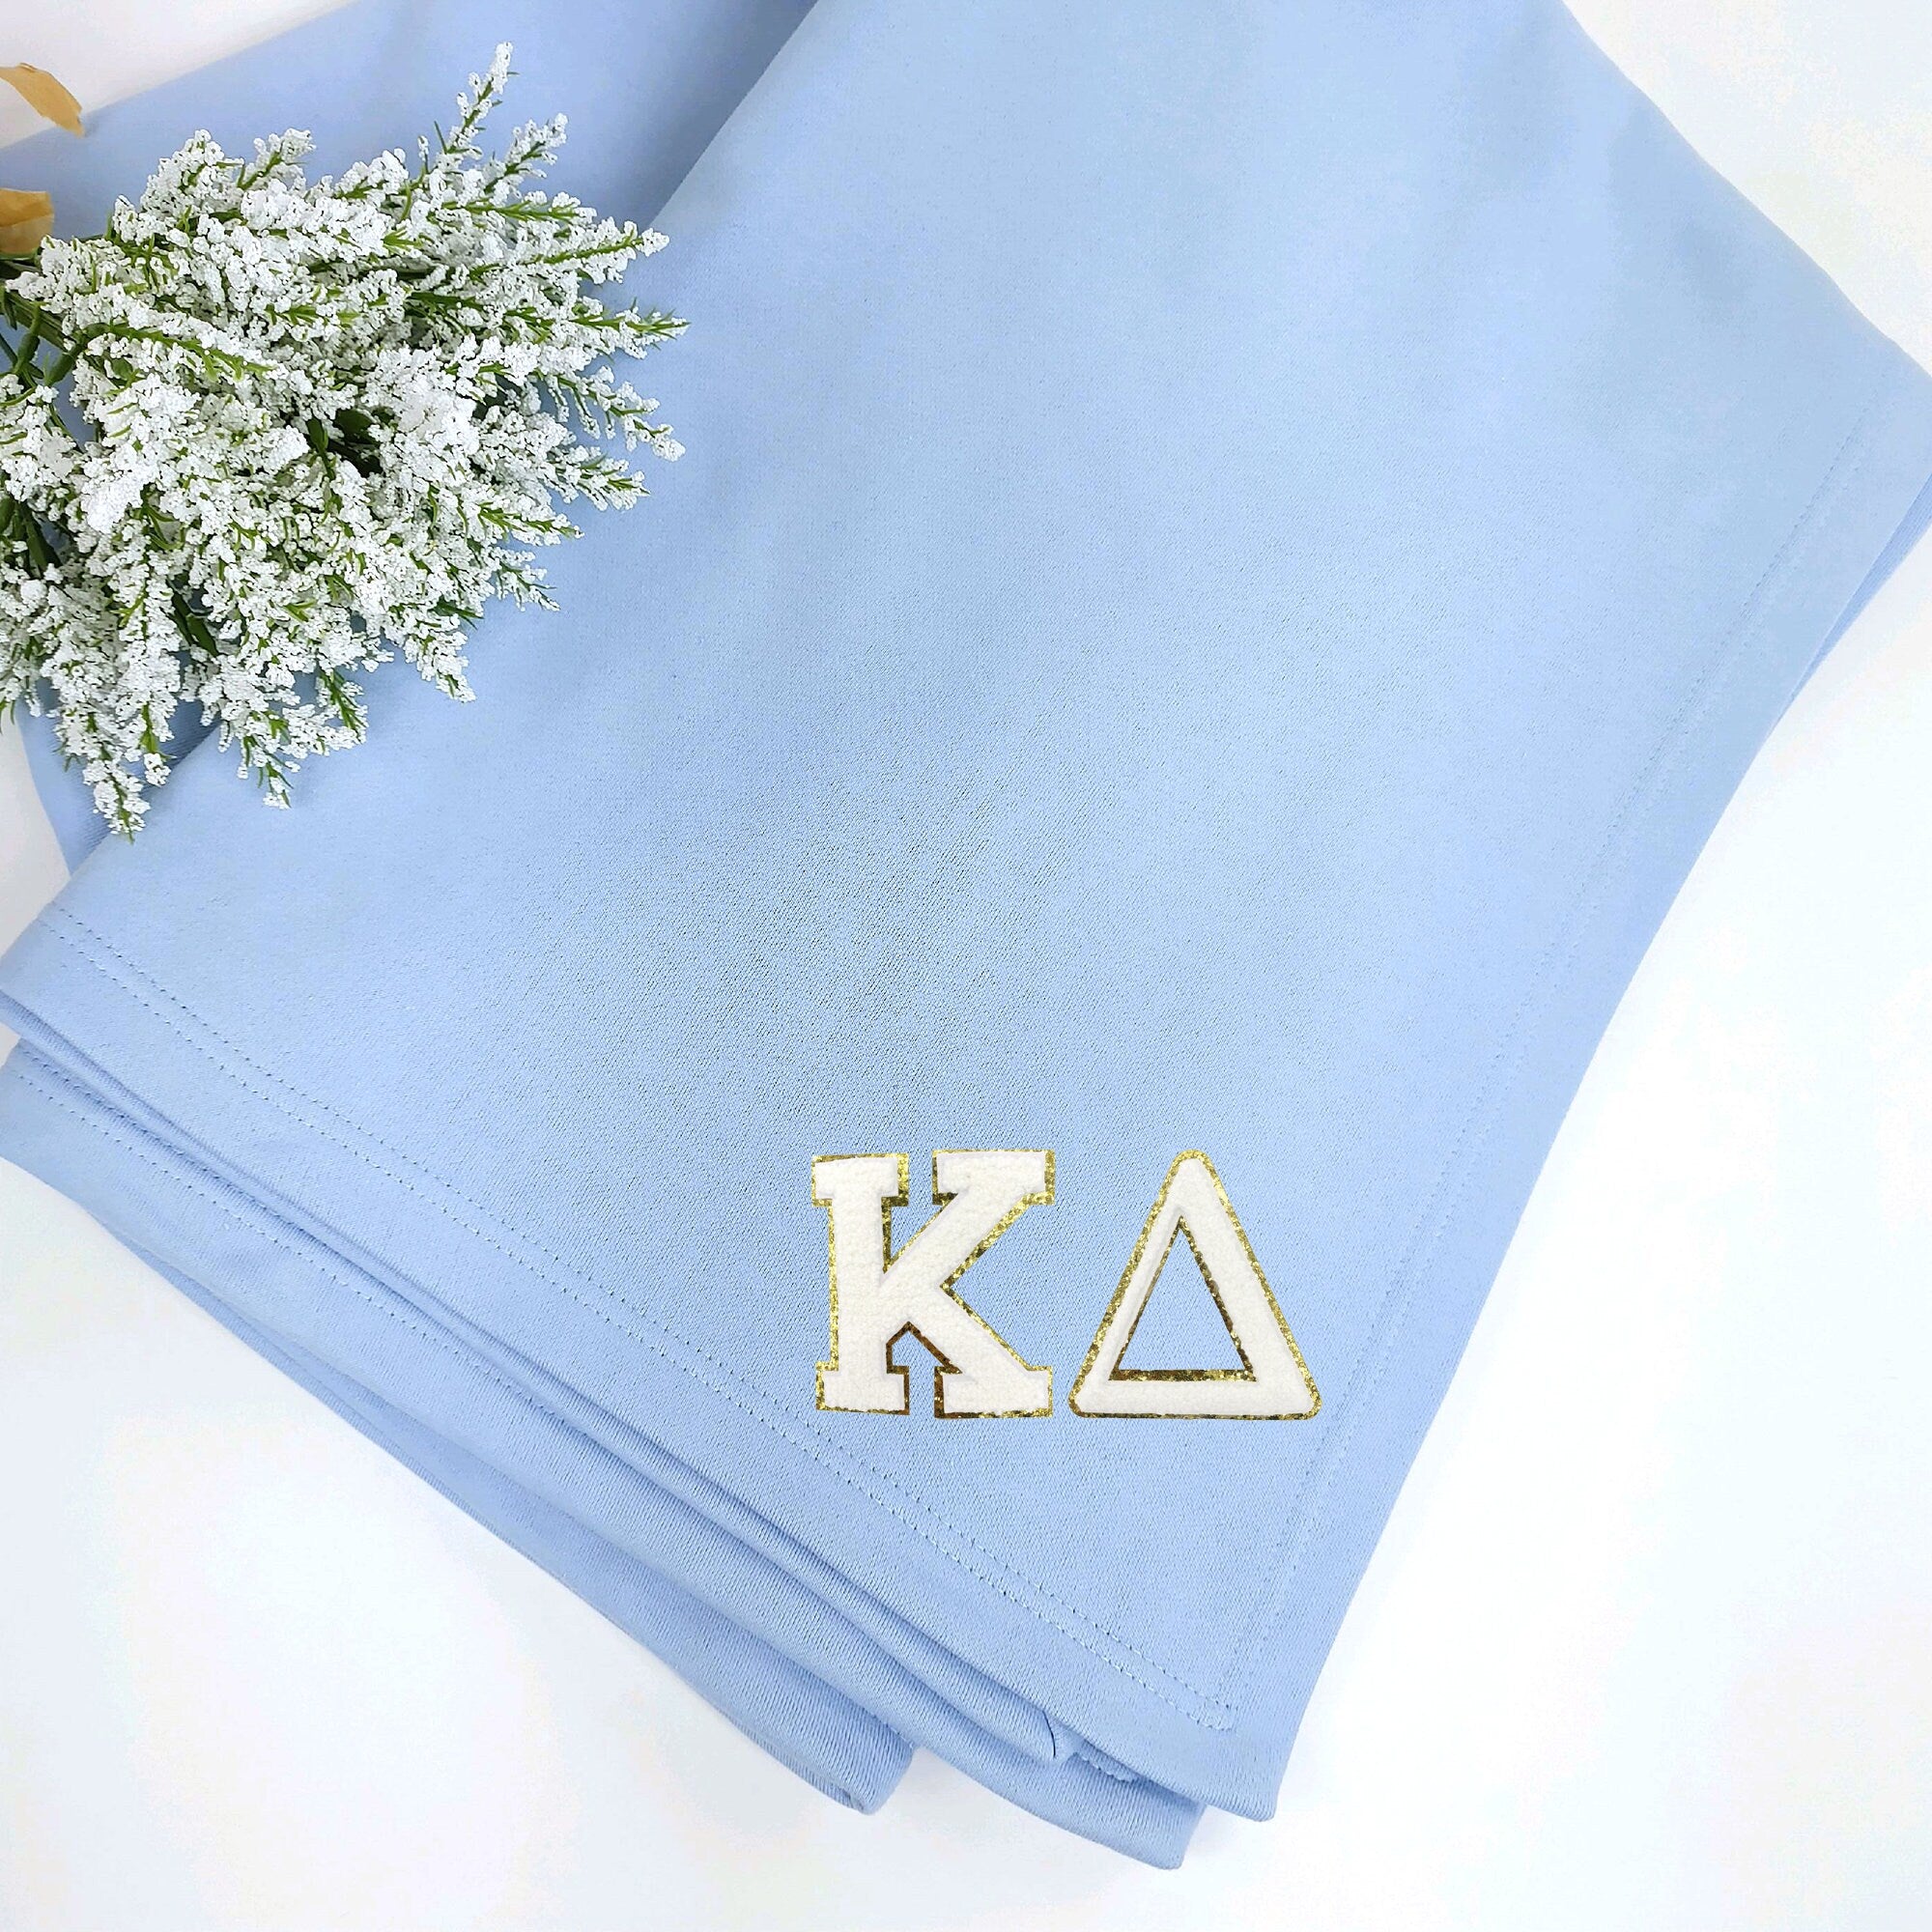 Kappa Delta Patch Blanket, Sorority Chenille Patch, Warm and Soft, Perfect Sorority Gift